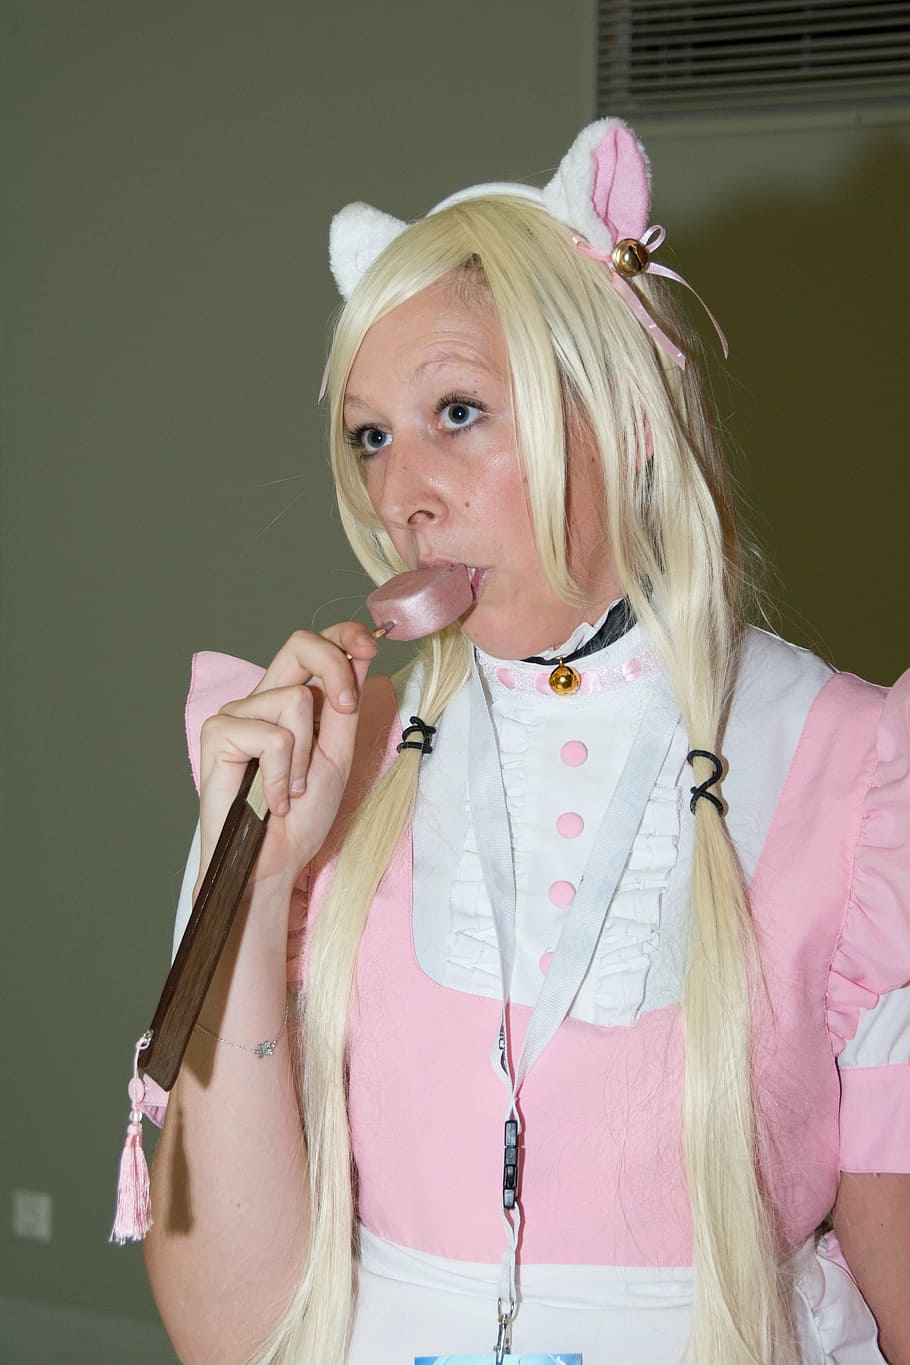 cosplay, panel, anime, manga, dress up, comic, event, convention, one person, blond hair